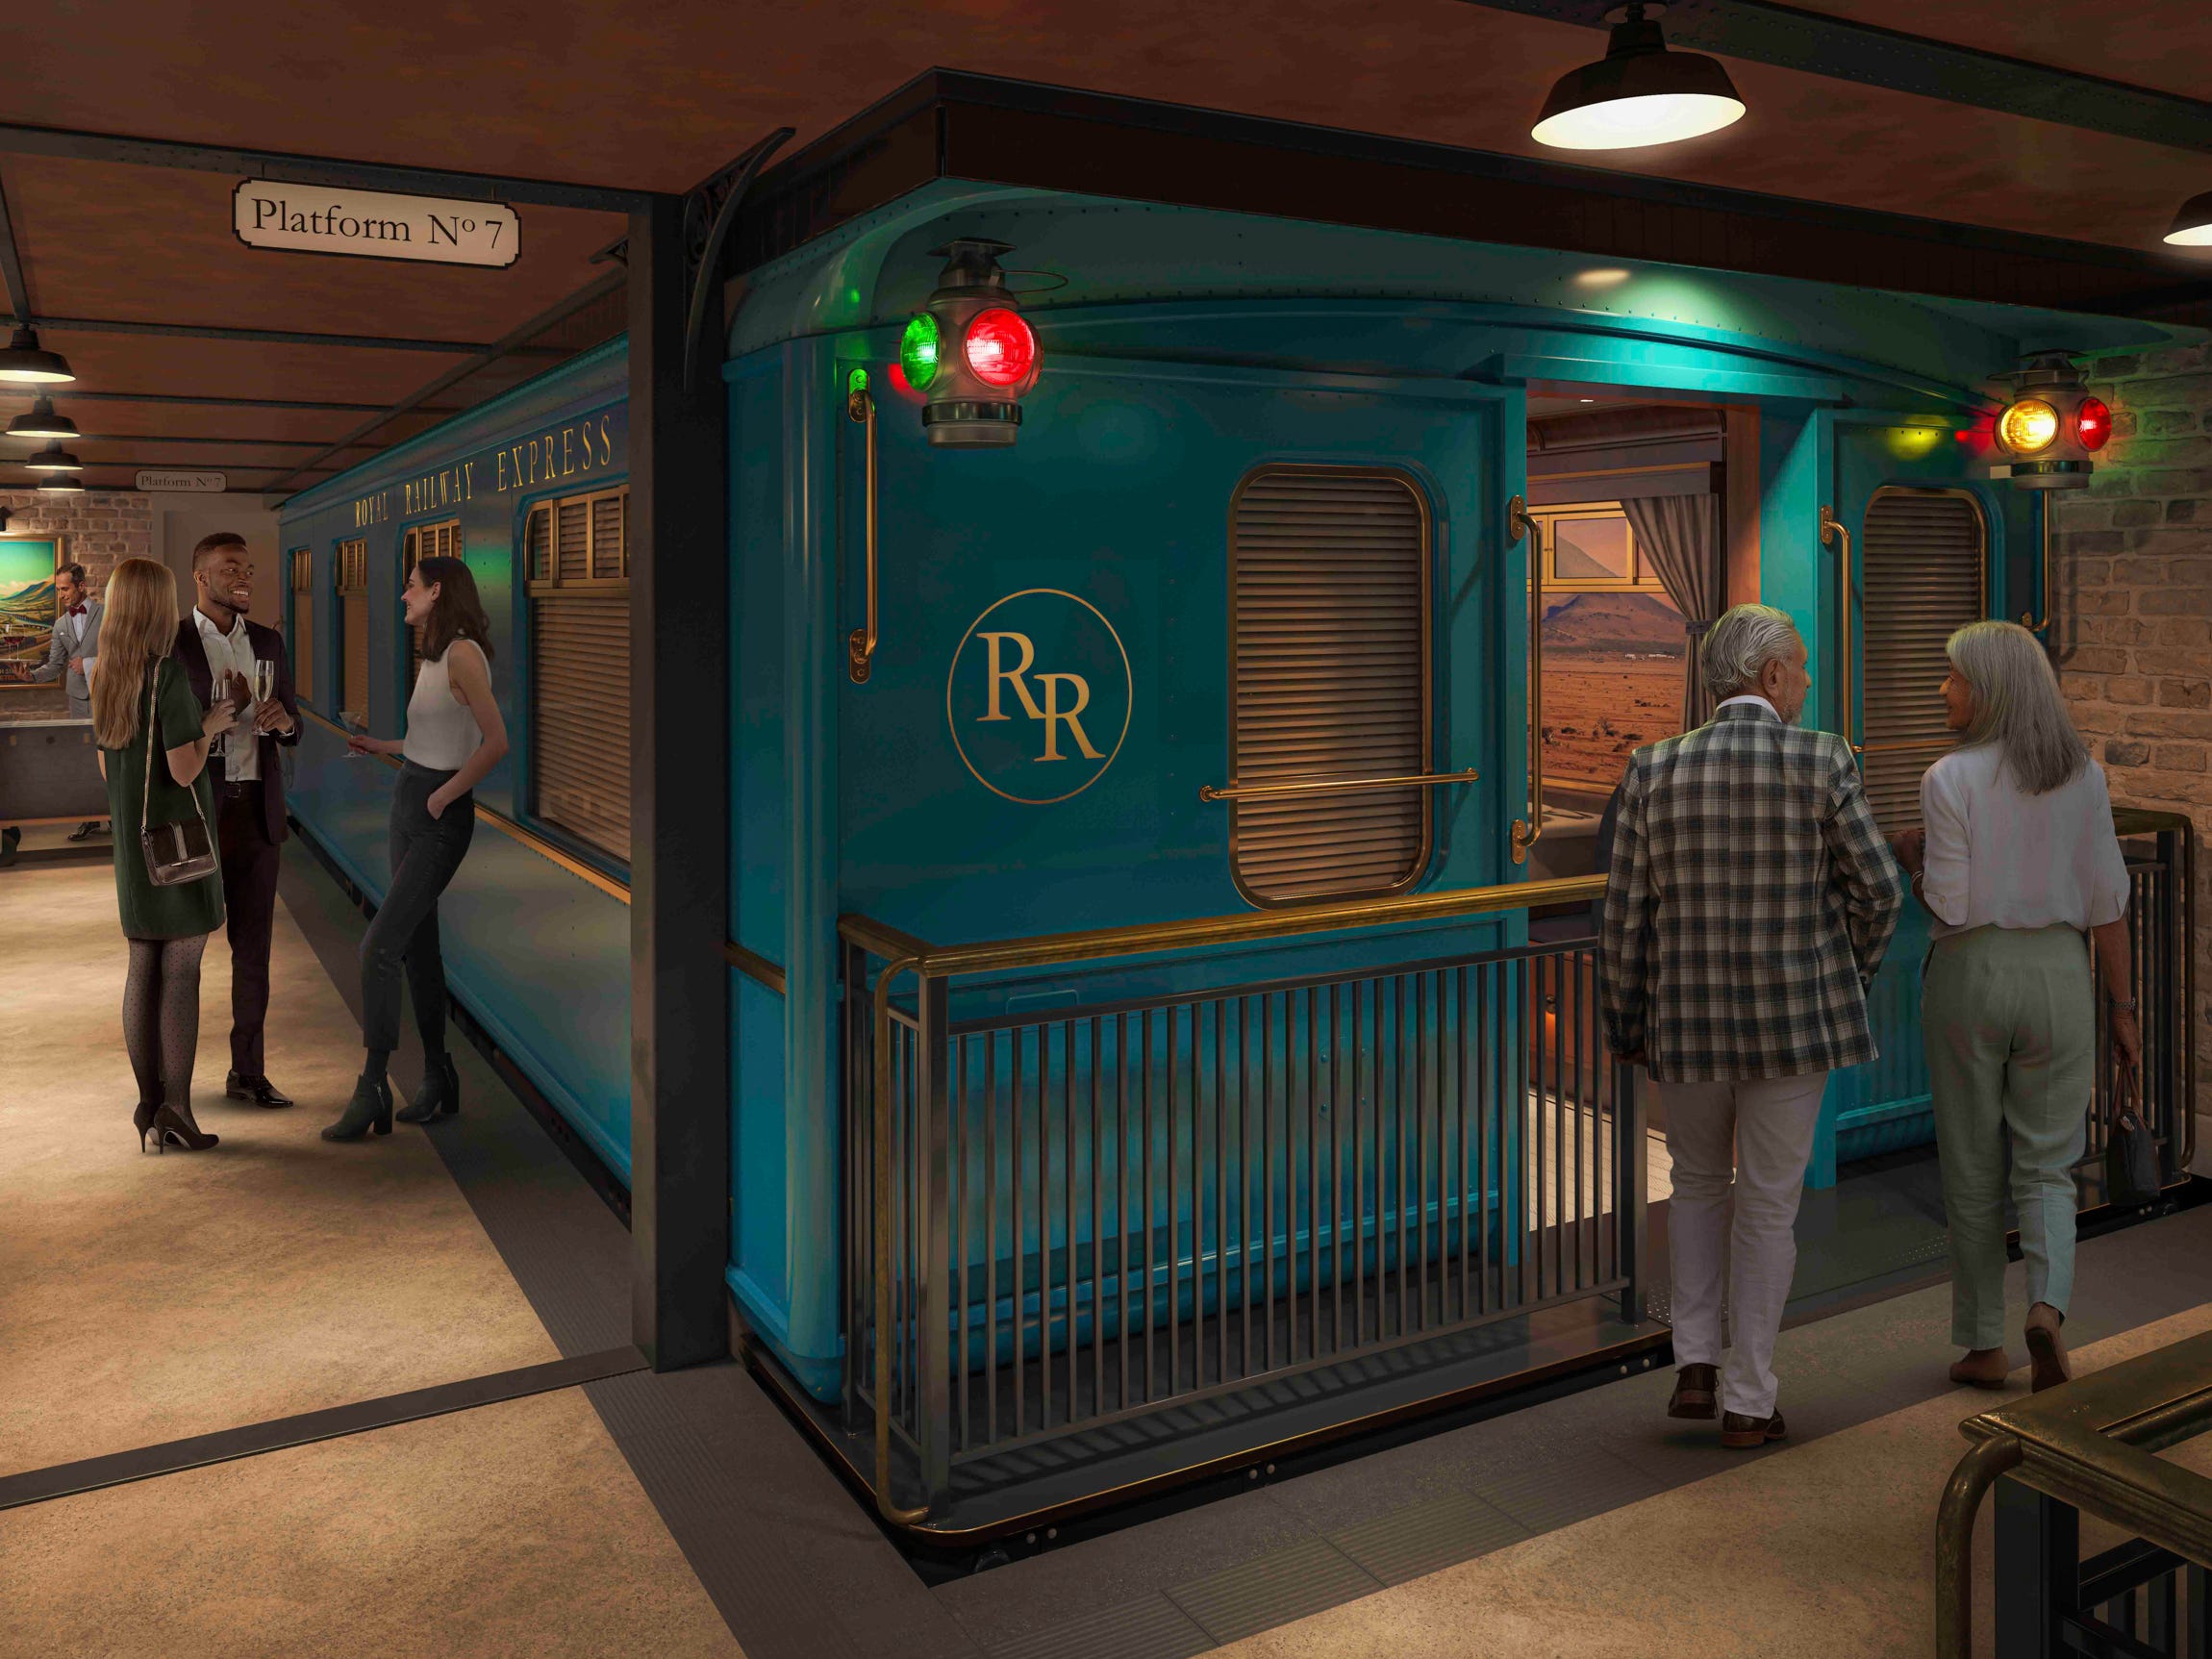 <p>Royal Caribbean hasn't revealed much about the new Royal Railway restaurant but said the dining experience will use tech "to travel to any place and time."</p>